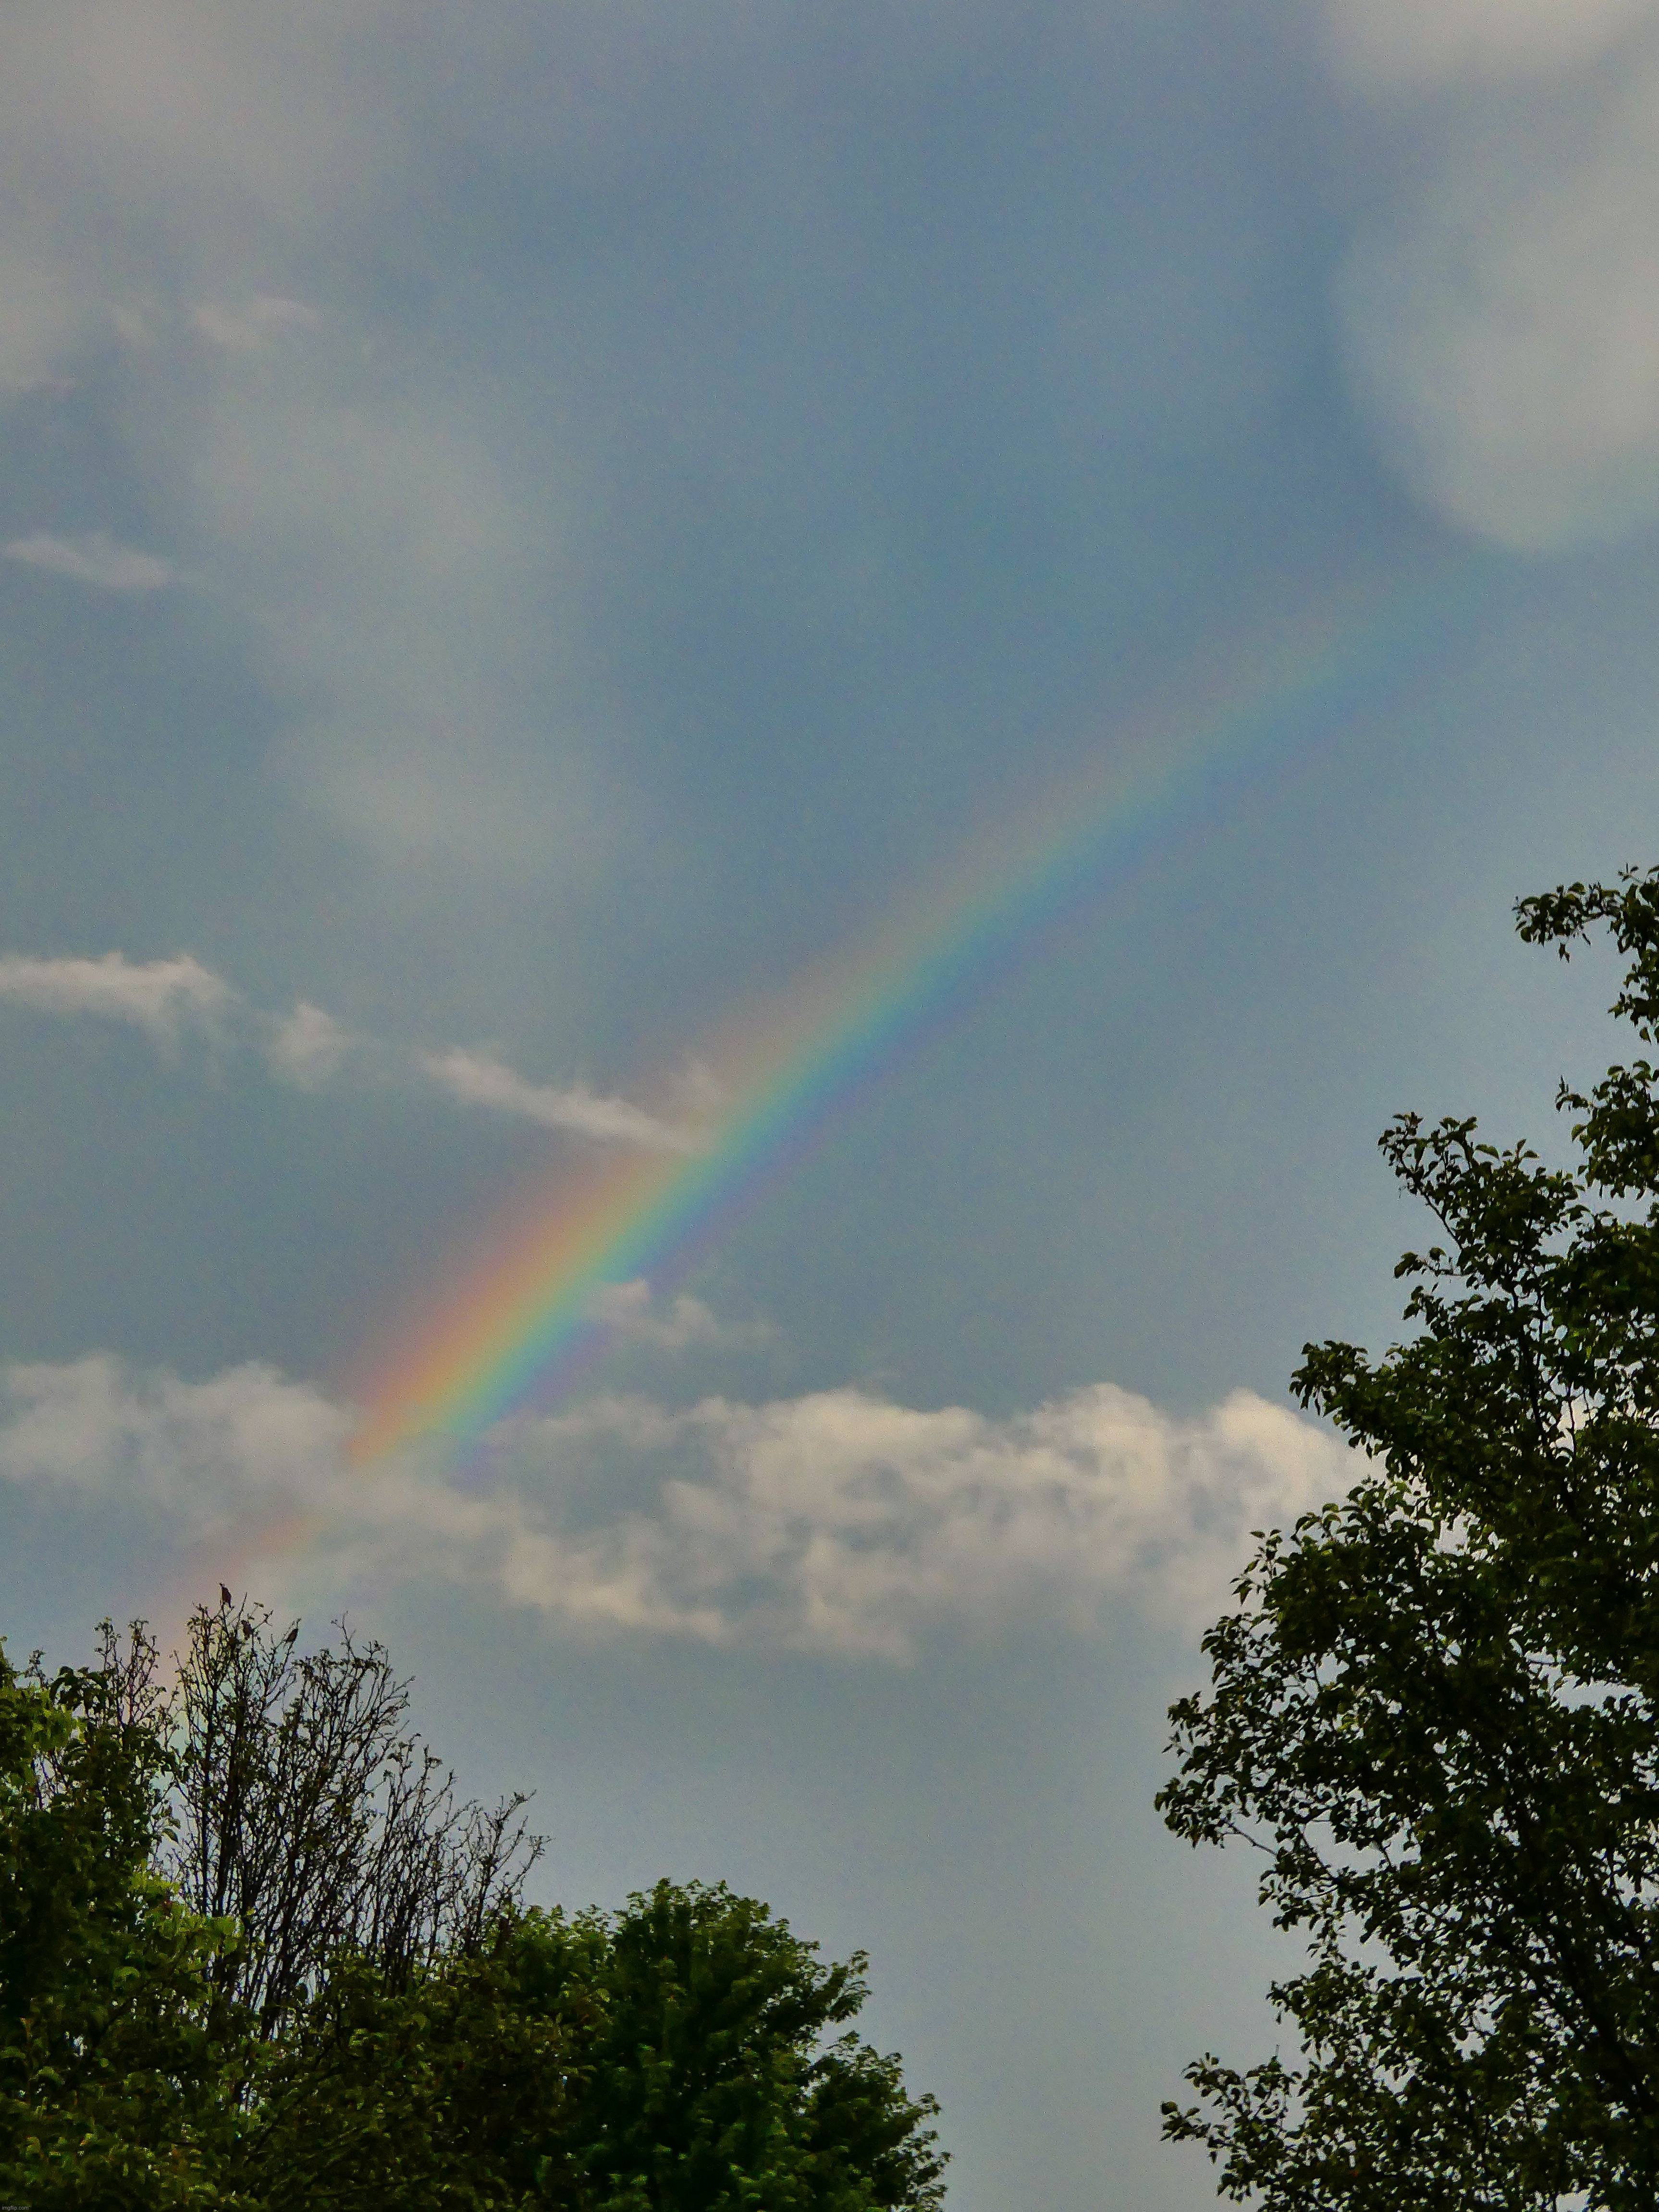 A rainbow after a passing shower | image tagged in share your own photos,lumix fz80,photography | made w/ Imgflip meme maker